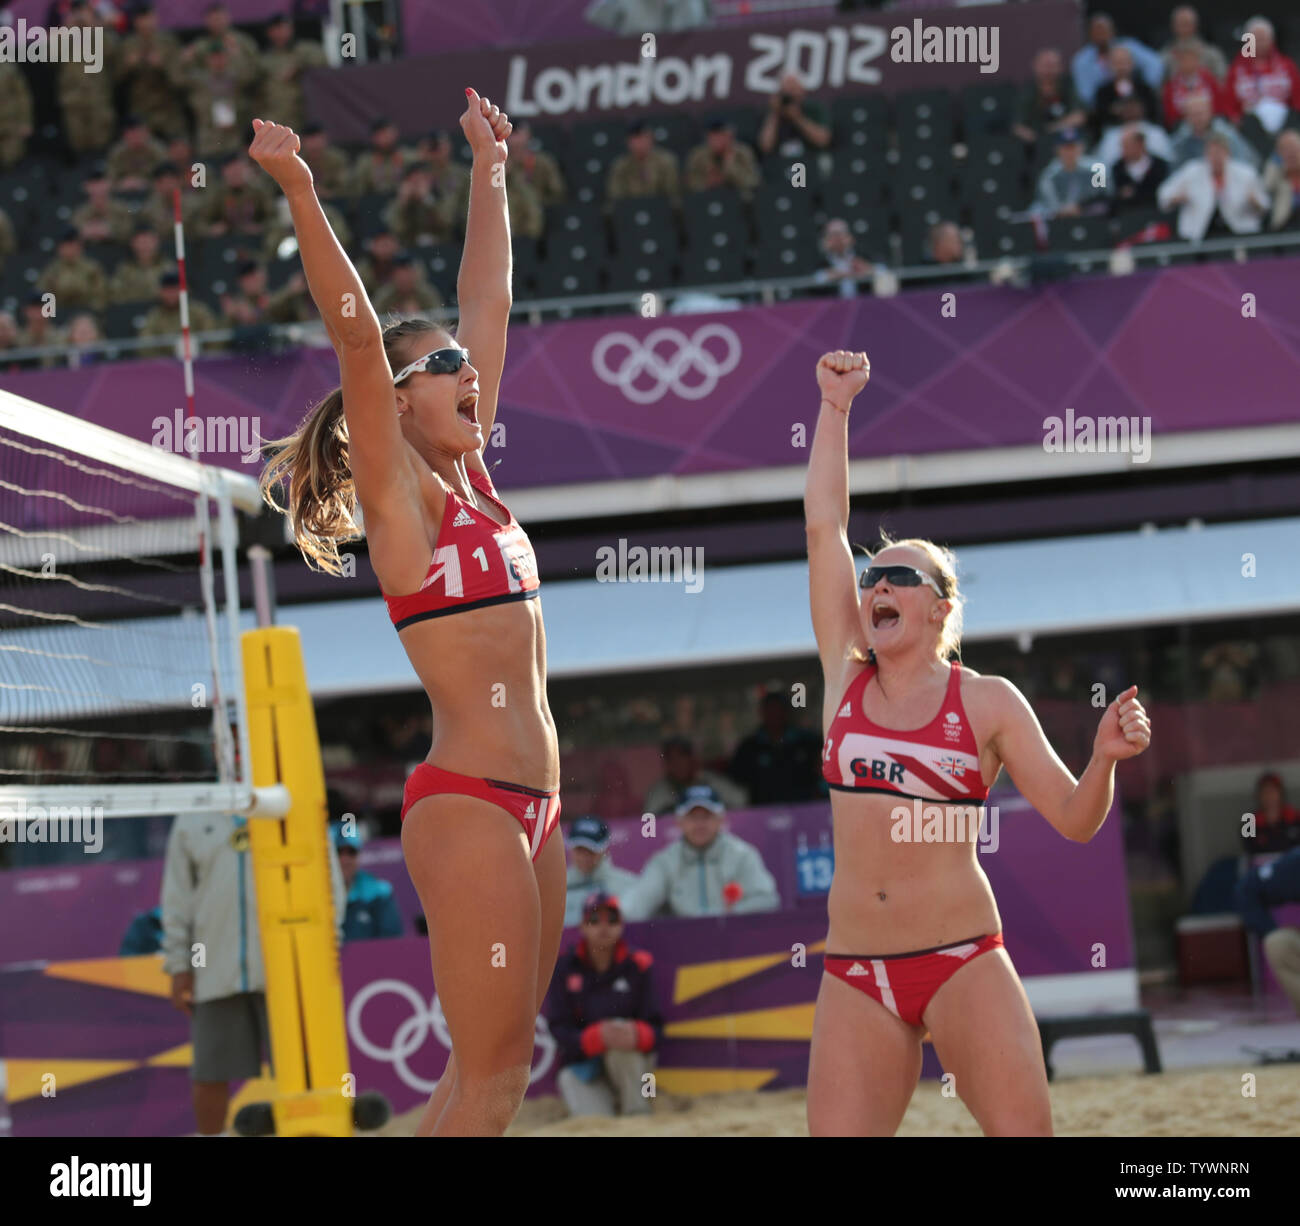 Great Britain's Zara Dampney and Shauna Mullin celebrate victory over Canada in the Women's Beach Volleyball at the London 2012 Summer Olympics on July 29, 2012 in London.      UPI/Hugo Philpott Stock Photo